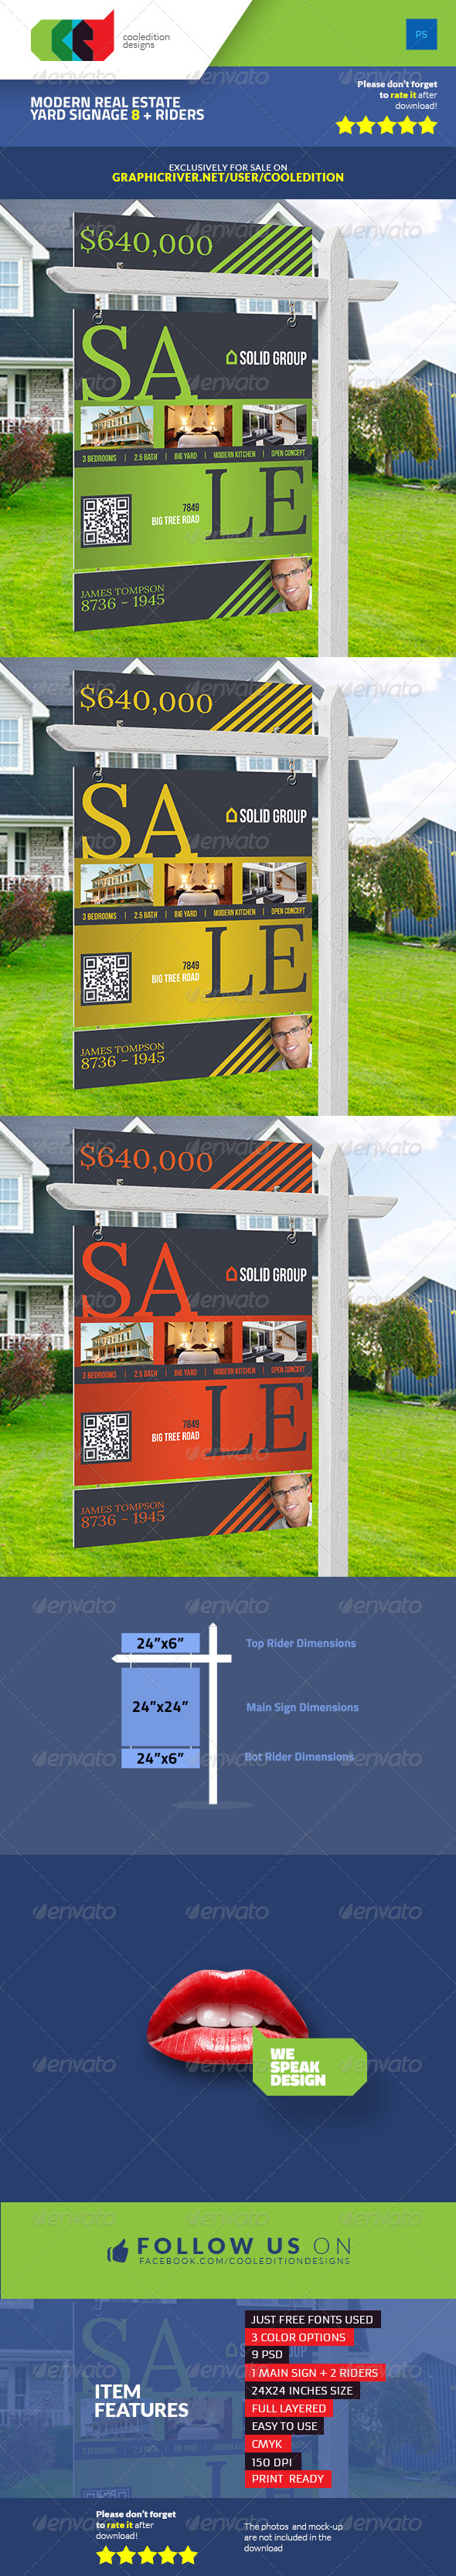 Download Modern Real Estate Yard Signage 8 + Riders by cooledition ...